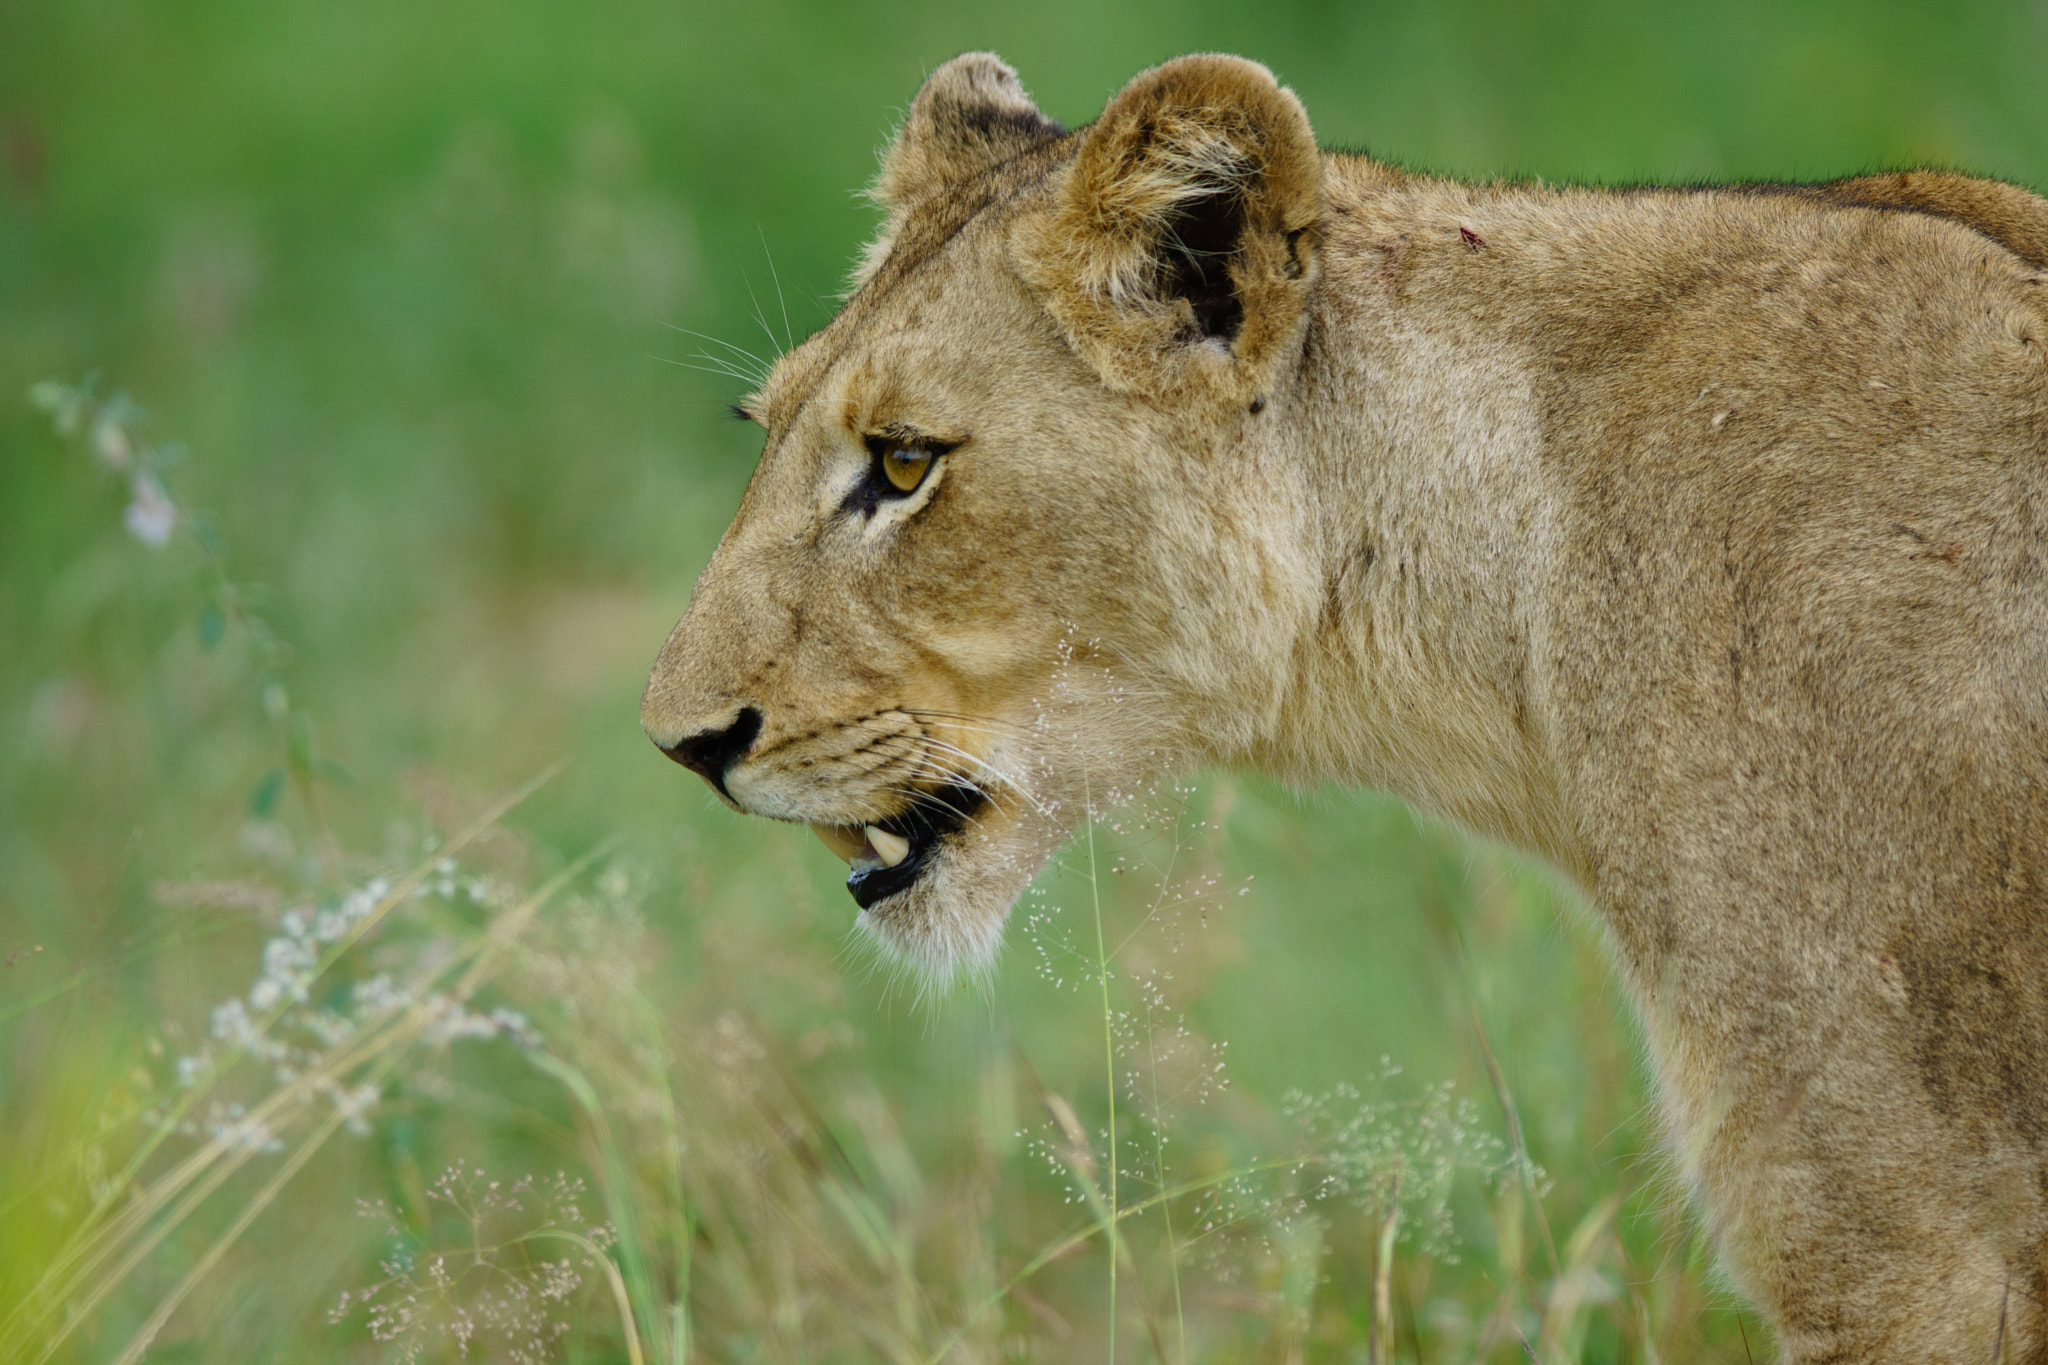 300mm F2.8 G sample photo. Young lion photography